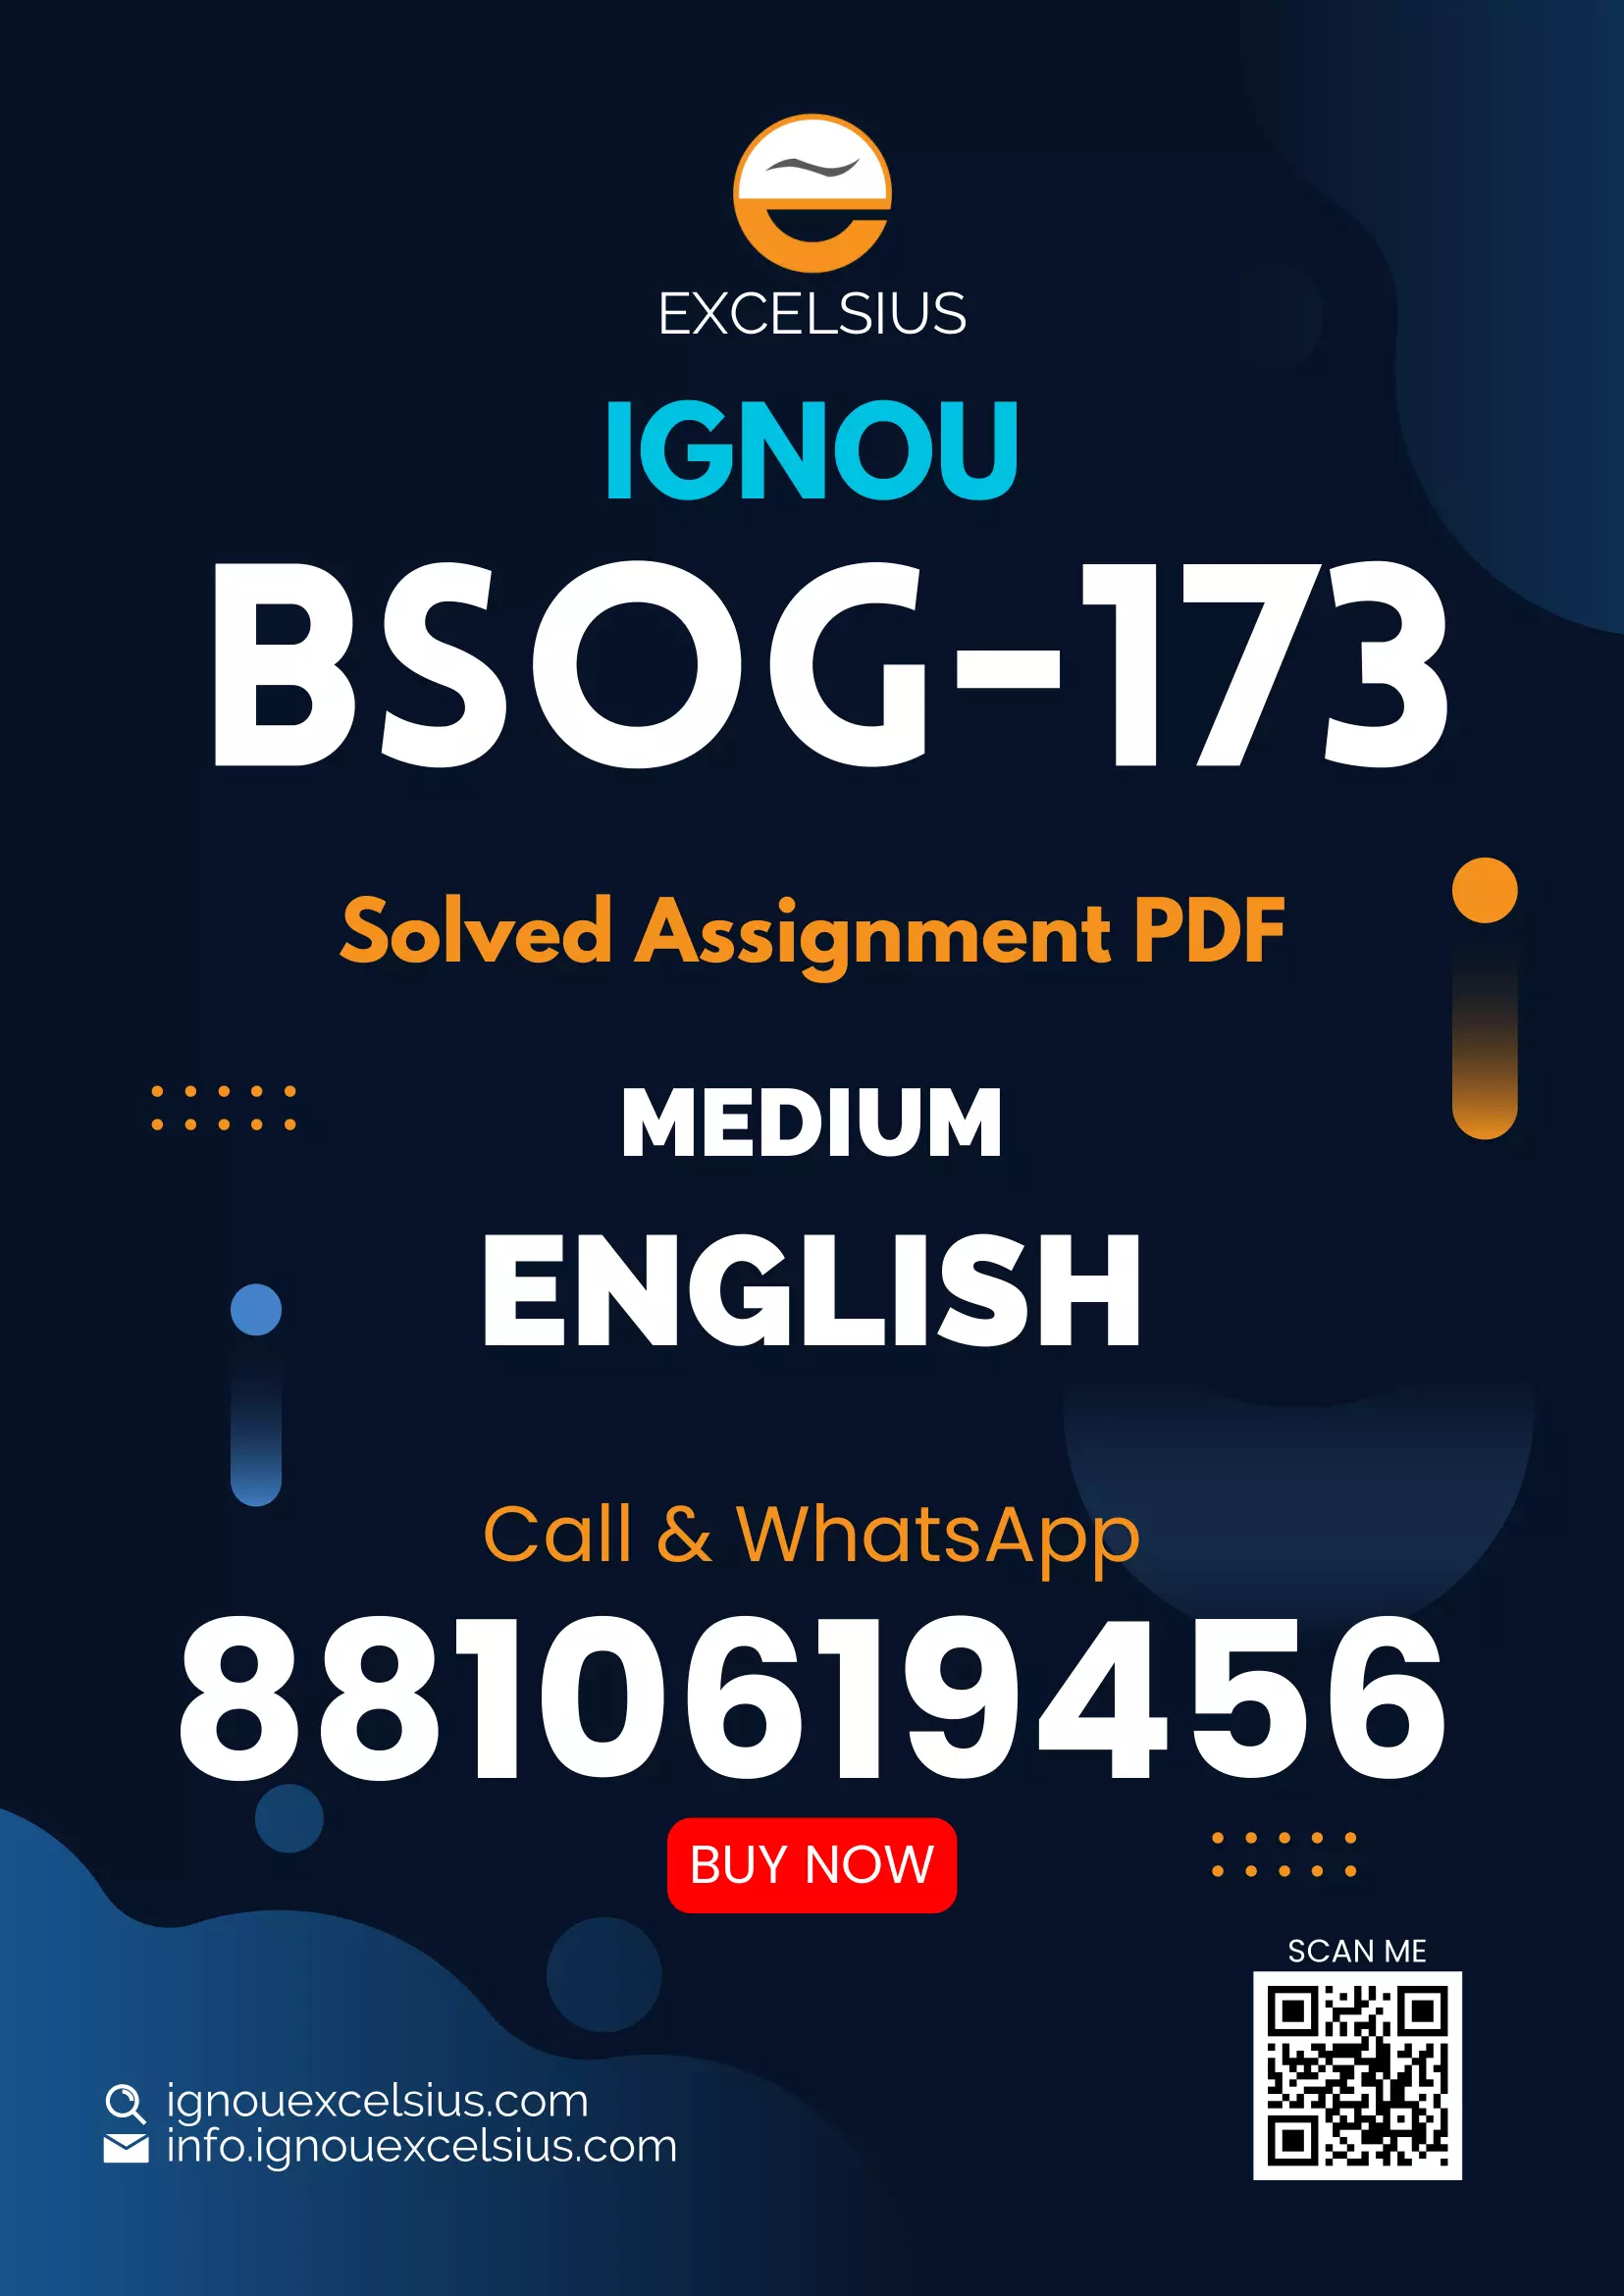 IGNOU BSOG-173 - Rethinking Development, Latest Solved Assignment-July 2022 – January 2023